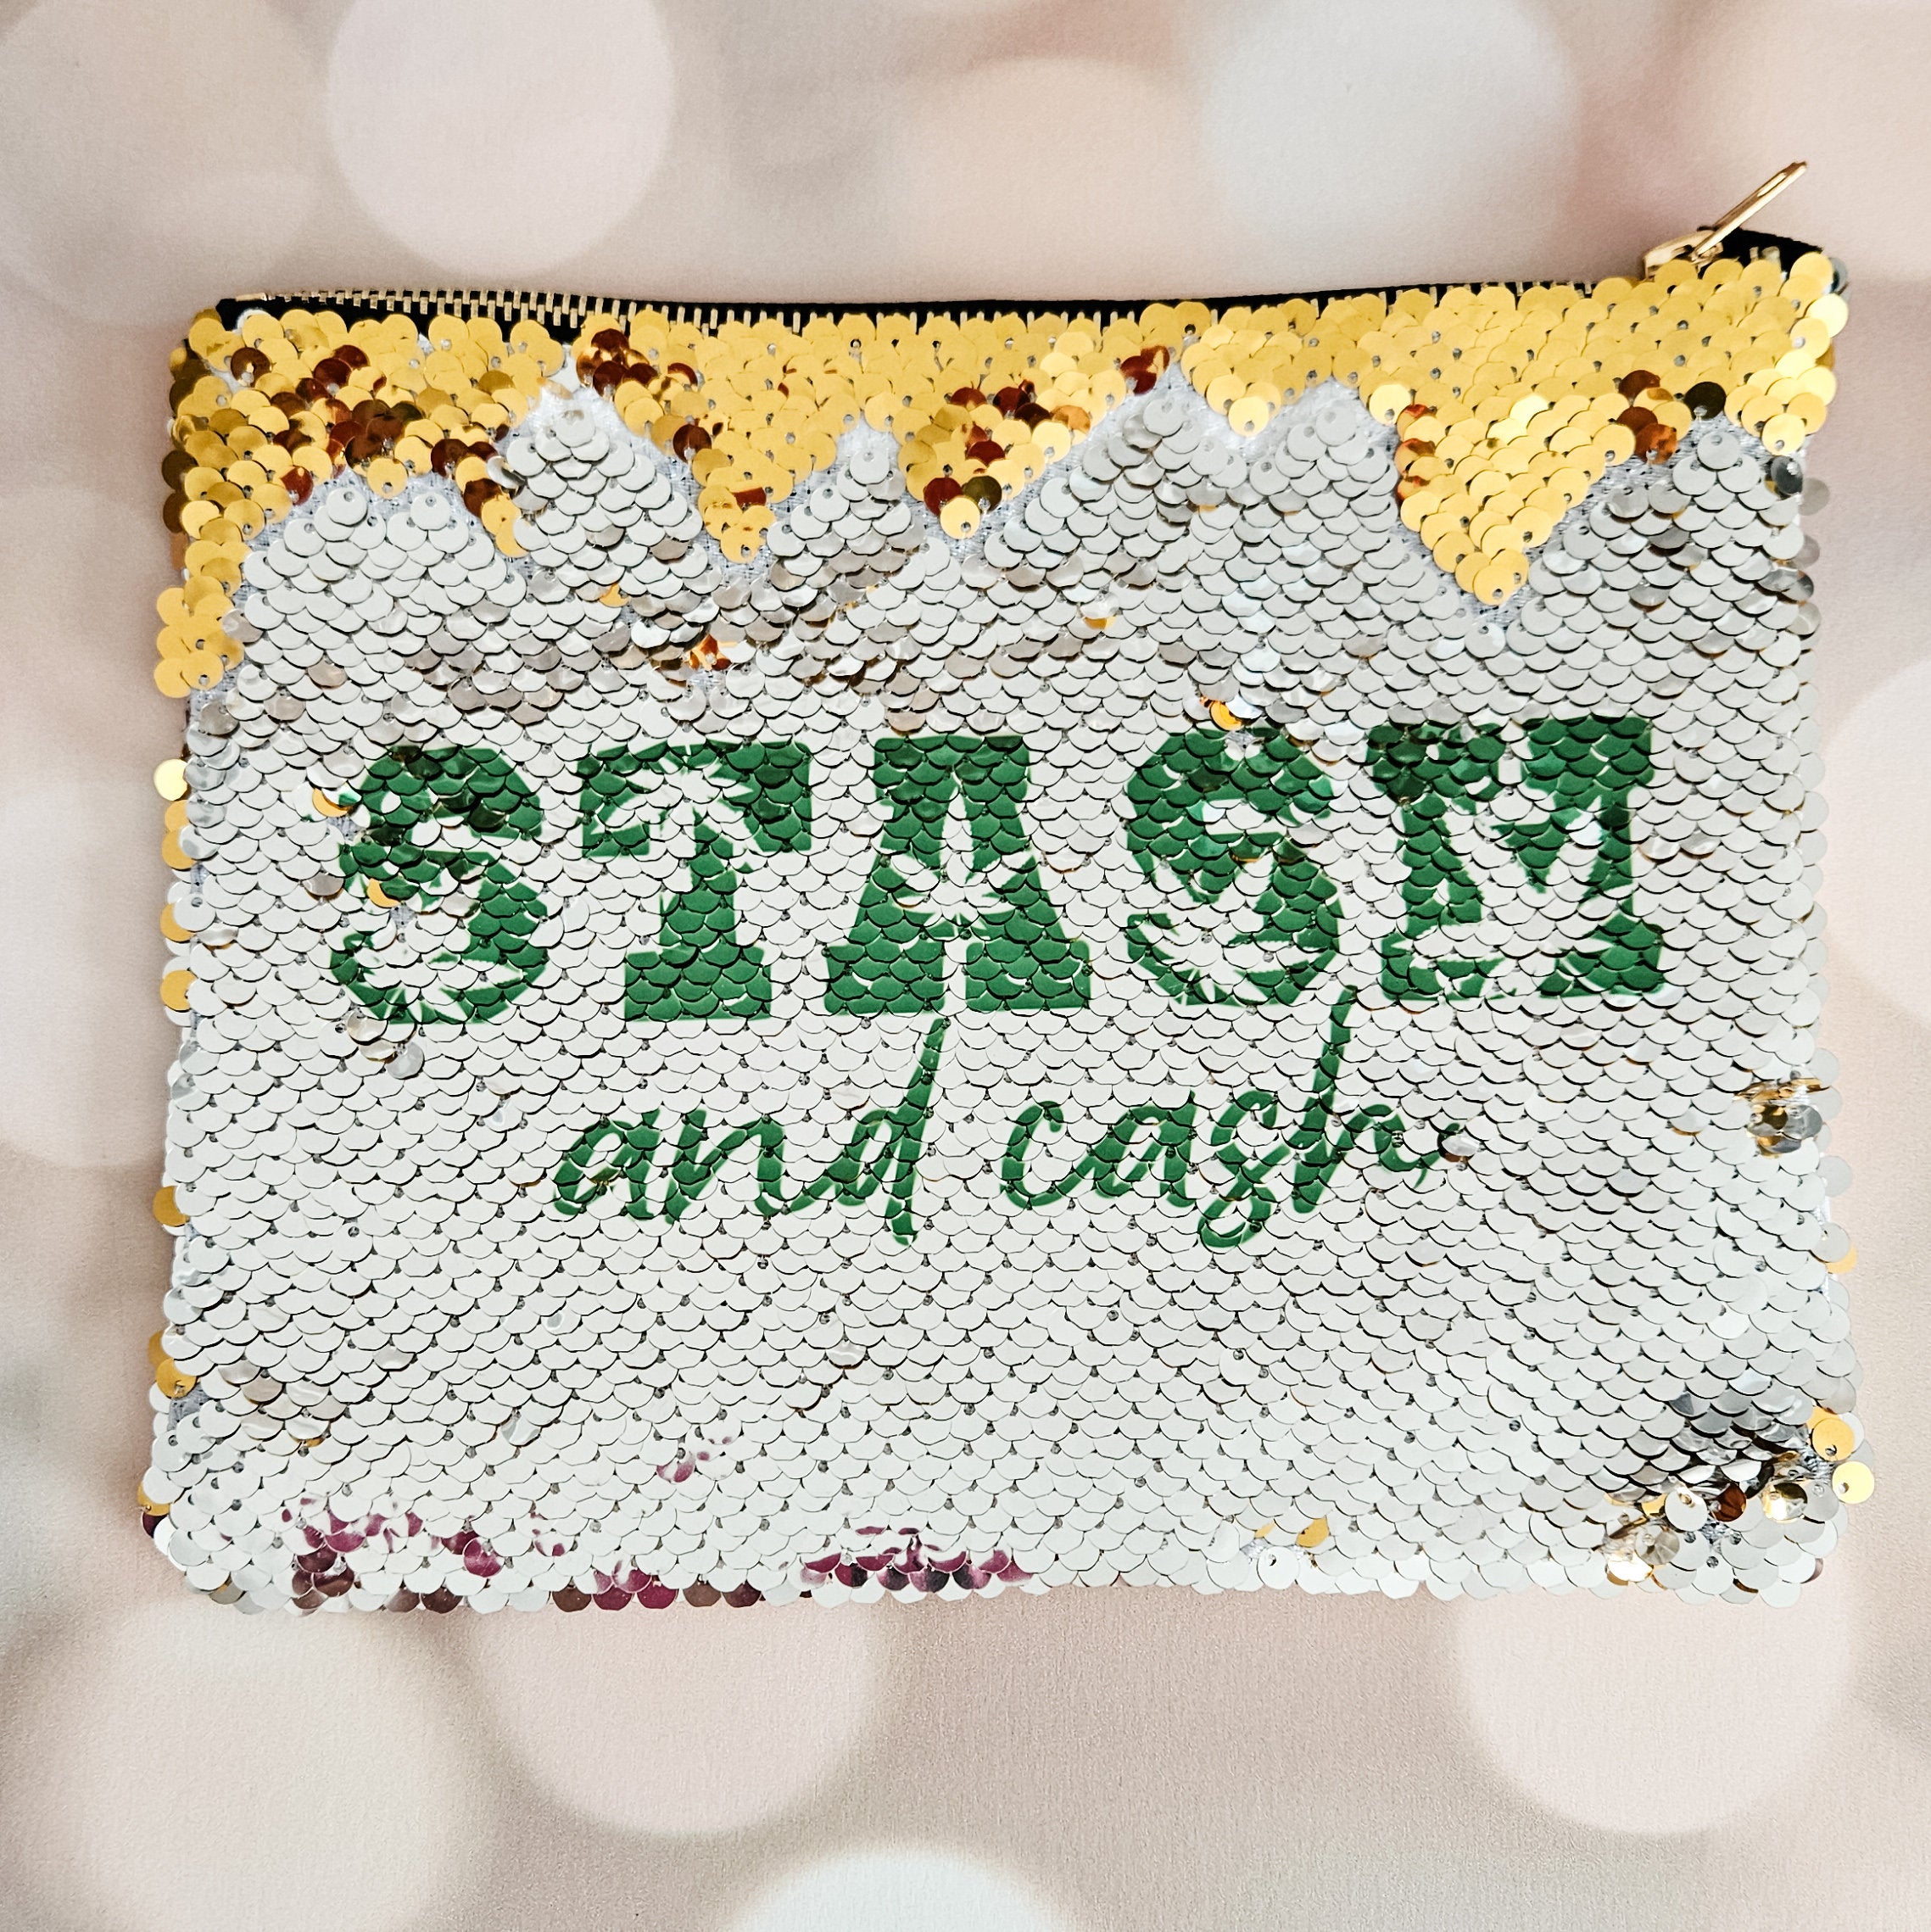 Stash and Cash 420 Sequin Cosmetic Case - Funny Weed Storage Pouch for Single Women Salt and Sparkle